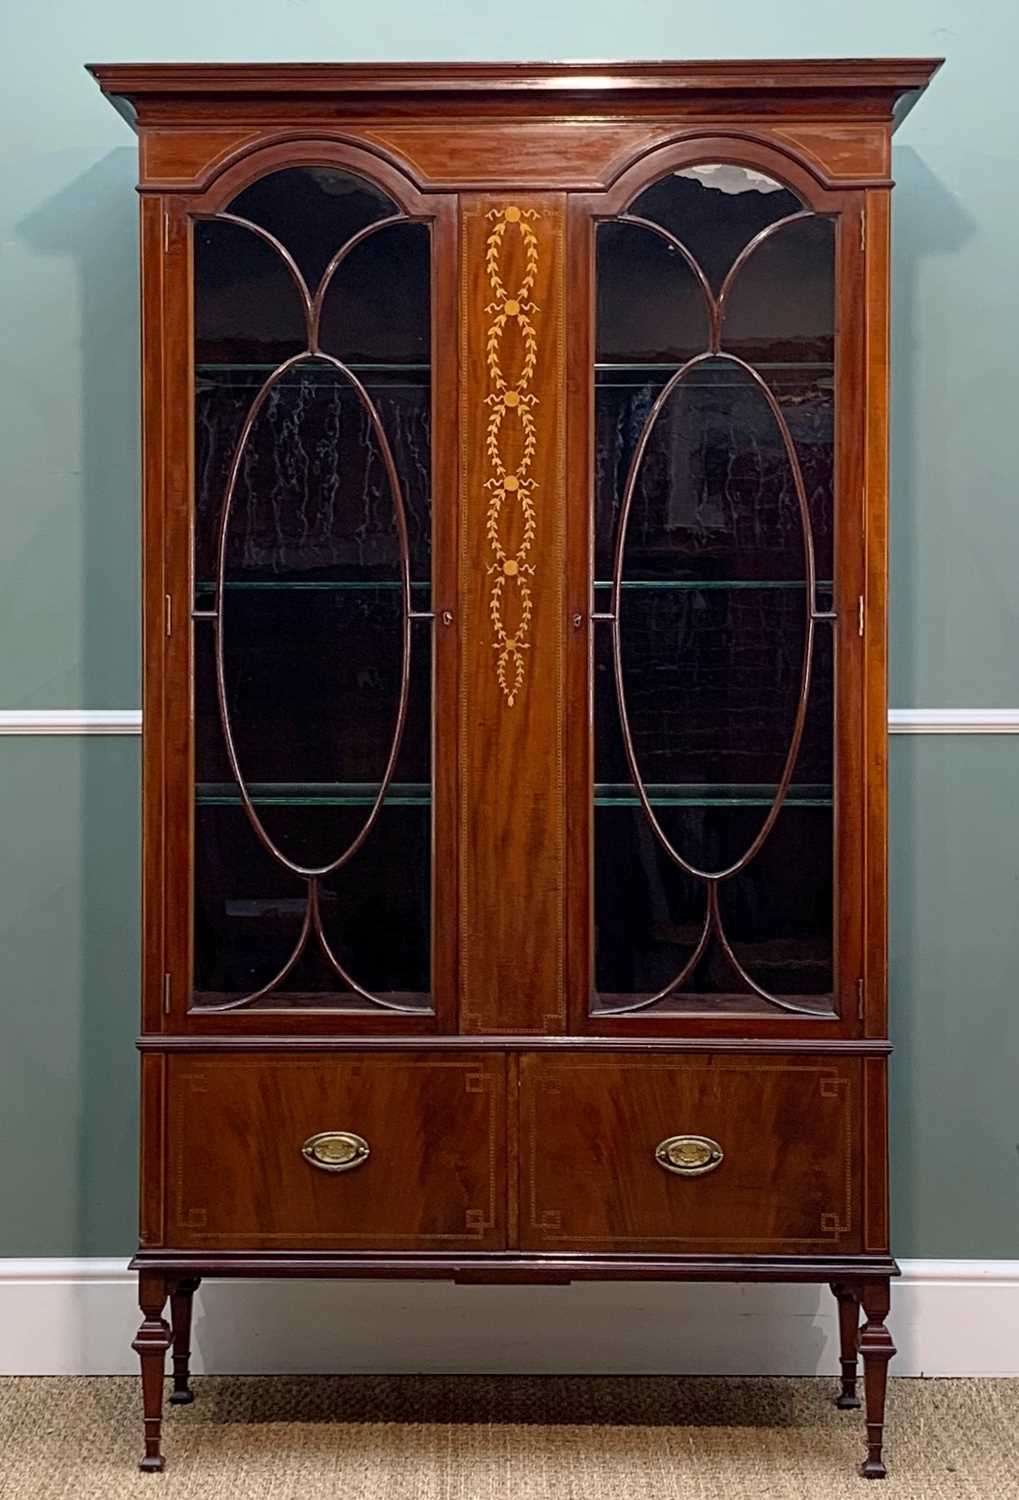 EDWARDIAN MARQUETRY MAHOGANY DISPLAY CABINET, oval astragal panelled doors, central panel with